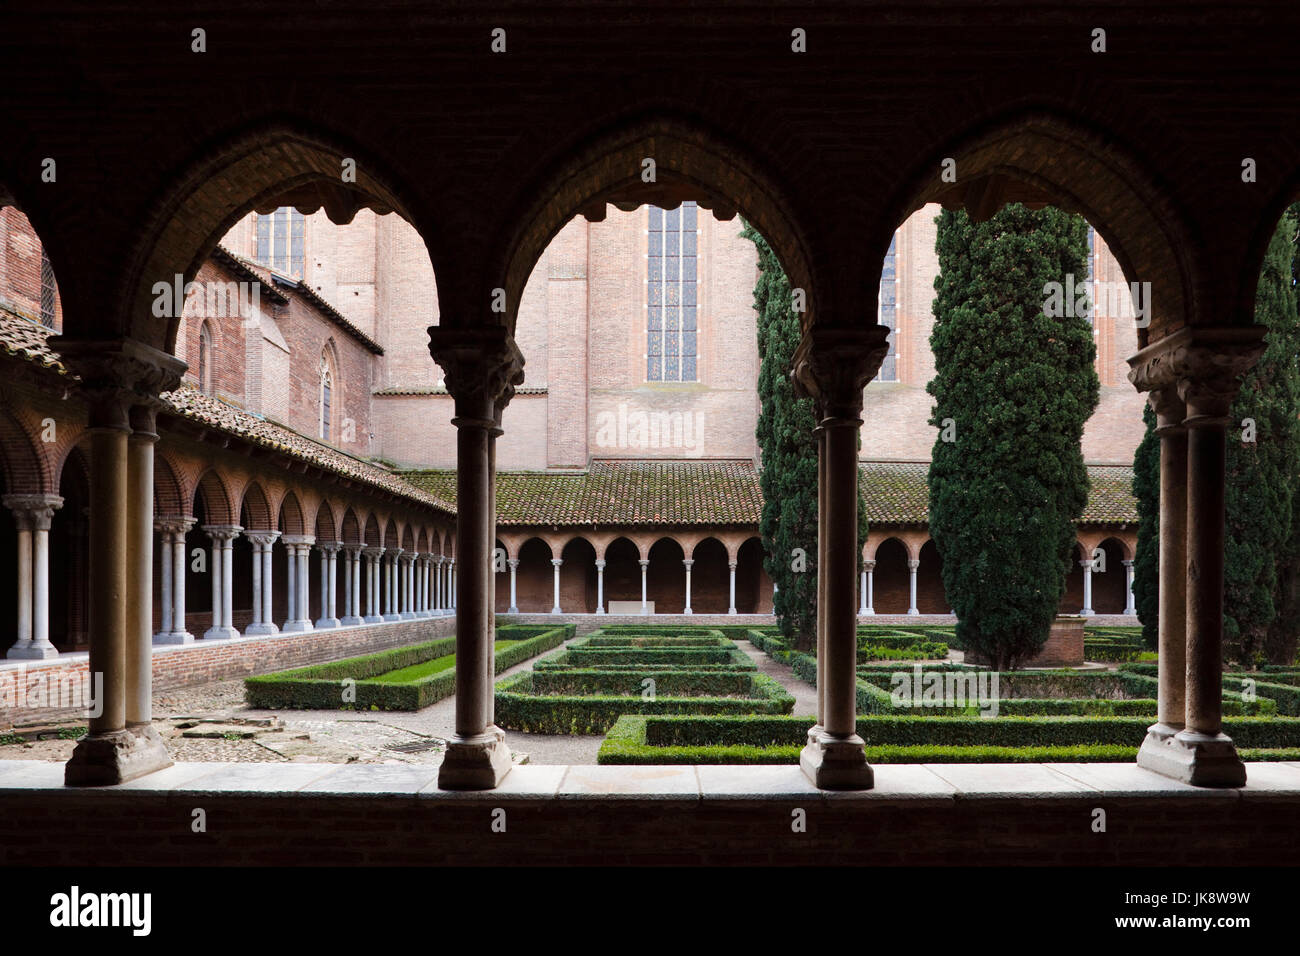 France, Midi-Pyrenees Region, Haute-Garonne Department, Toulouse, Eglise des Jacobins, Mother Church of the Dominican Order, resting place of Saint Thomas Aquinas, 1225-1274, founder of the order, Cloitre des Jacobins cloister Stock Photo